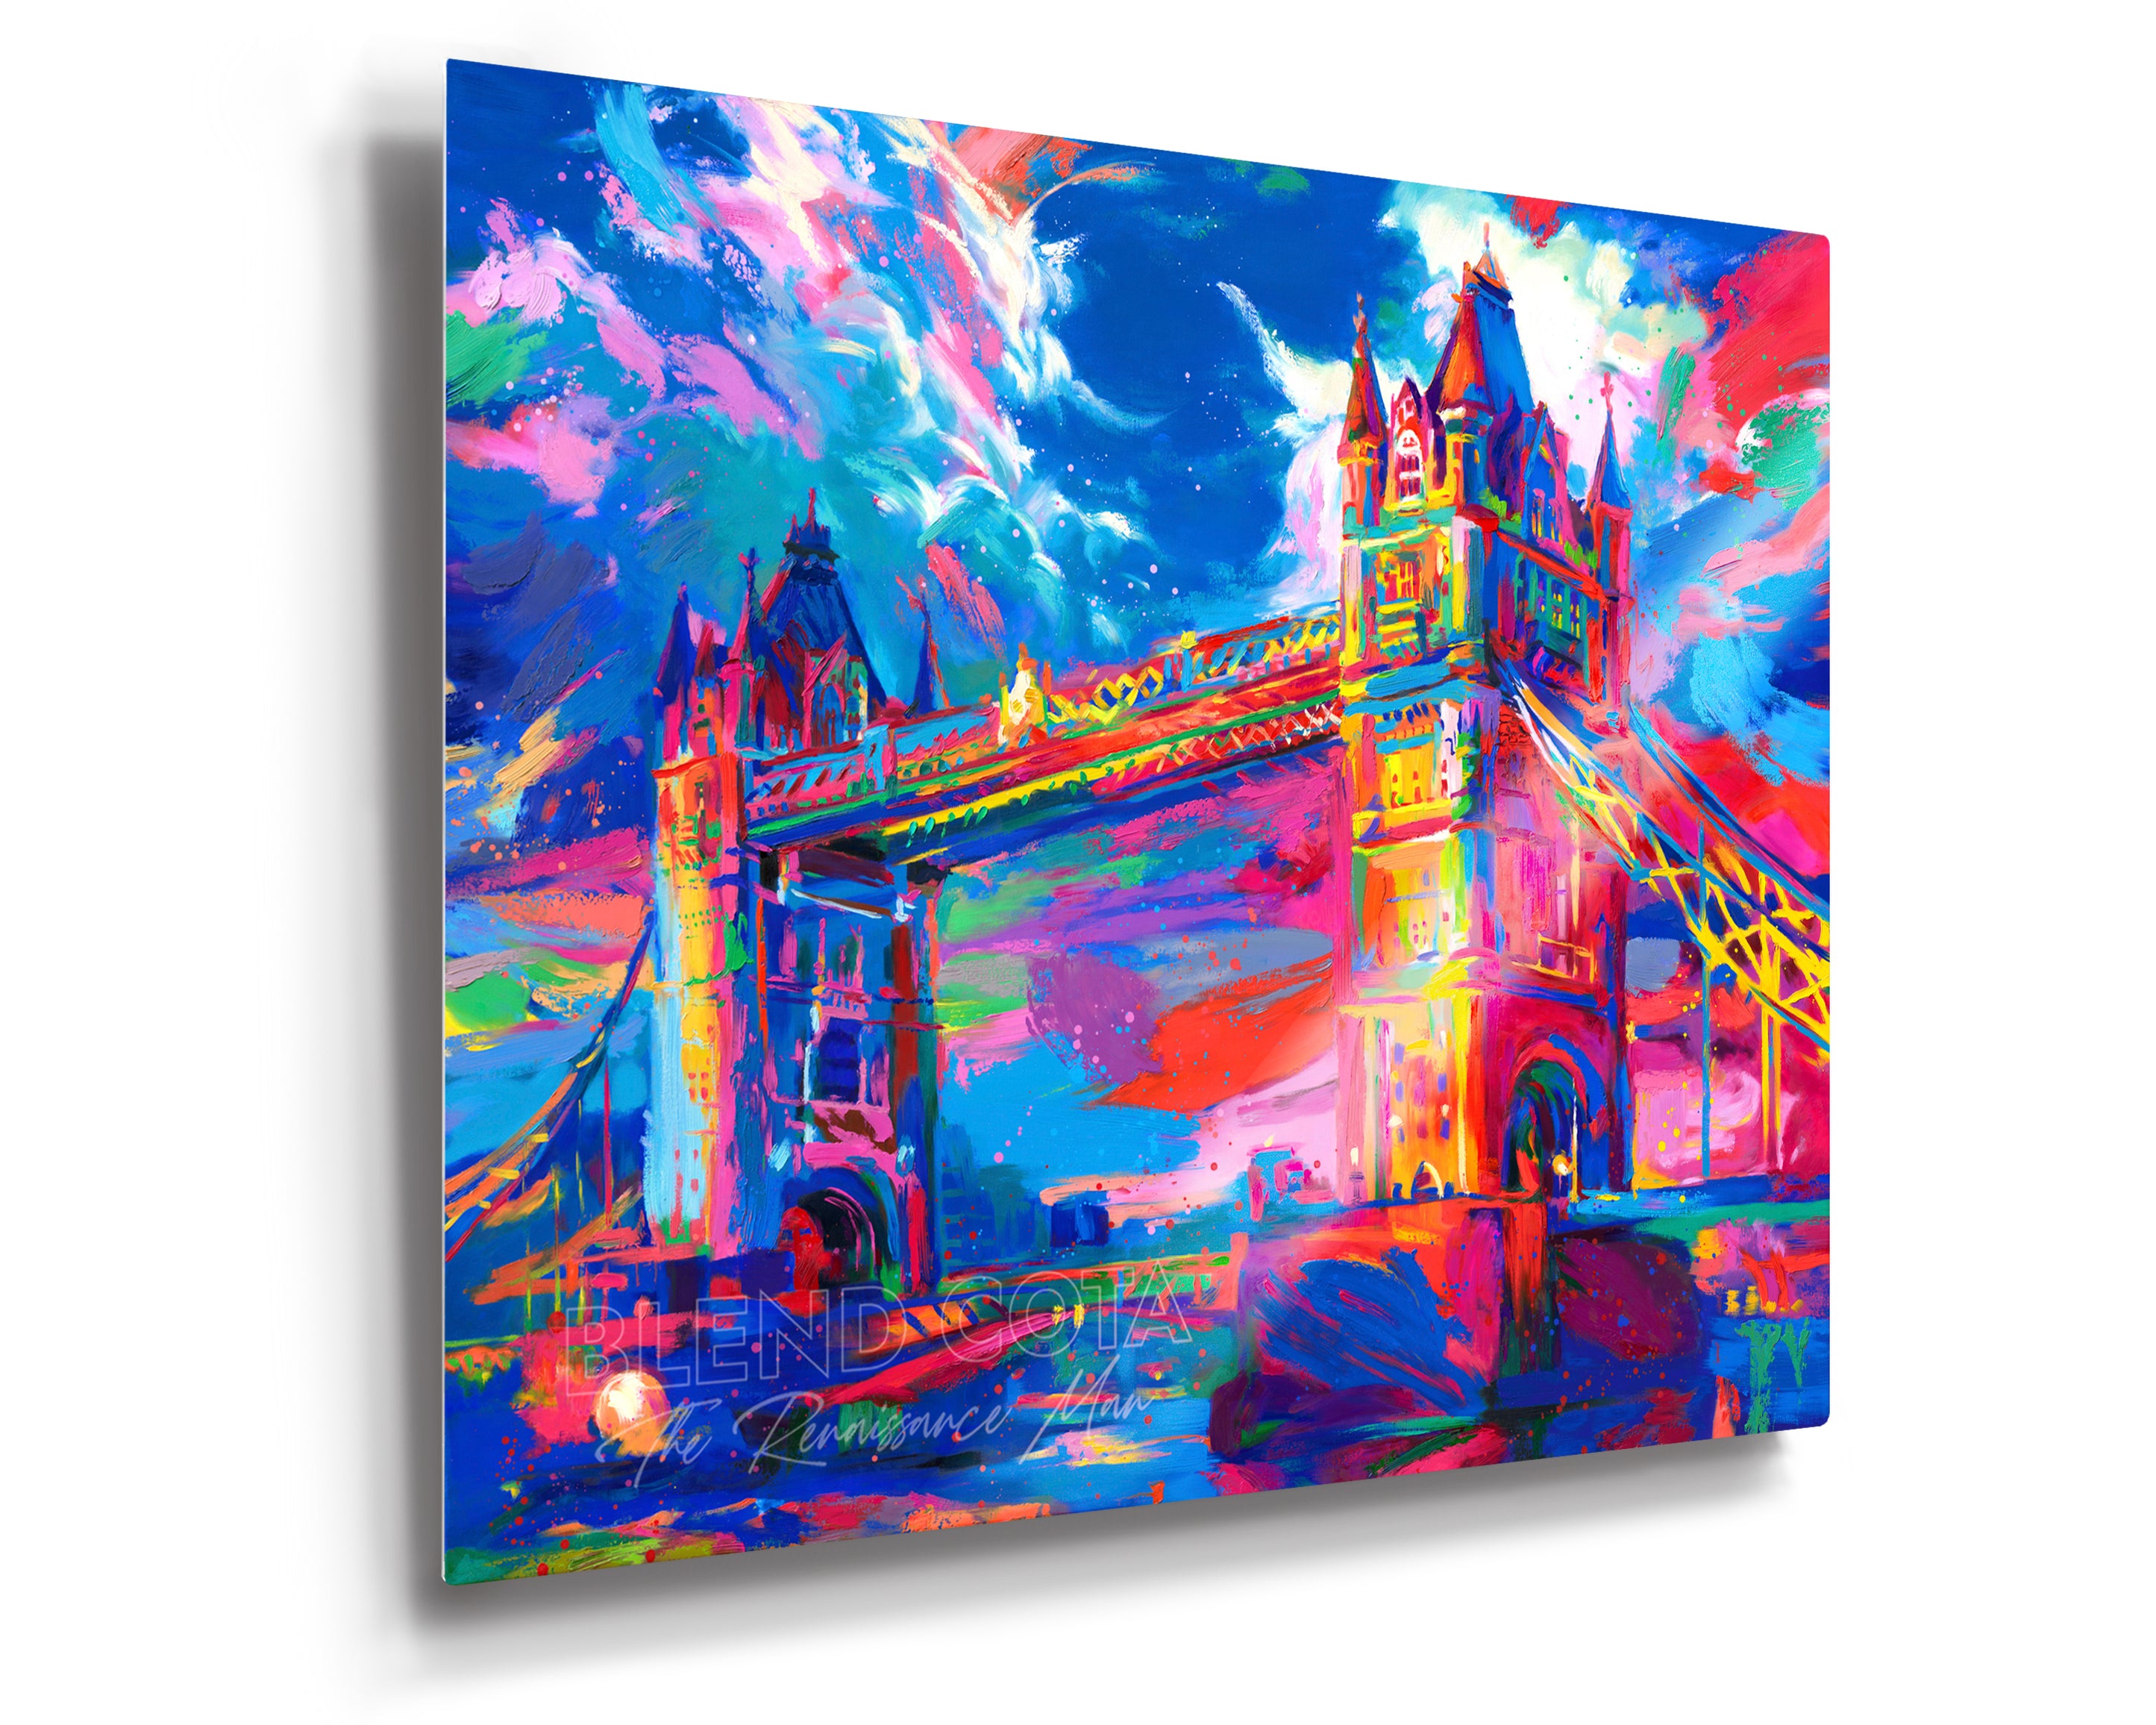 Limited edition on metal of the London Tower Bridge in United Kingdom, seen below from the Thames, displaying masterful engineering and architecture of Victorian Gothic style, and symbol of strength and beauty, in colorful brushstrokes, color expressionism style.